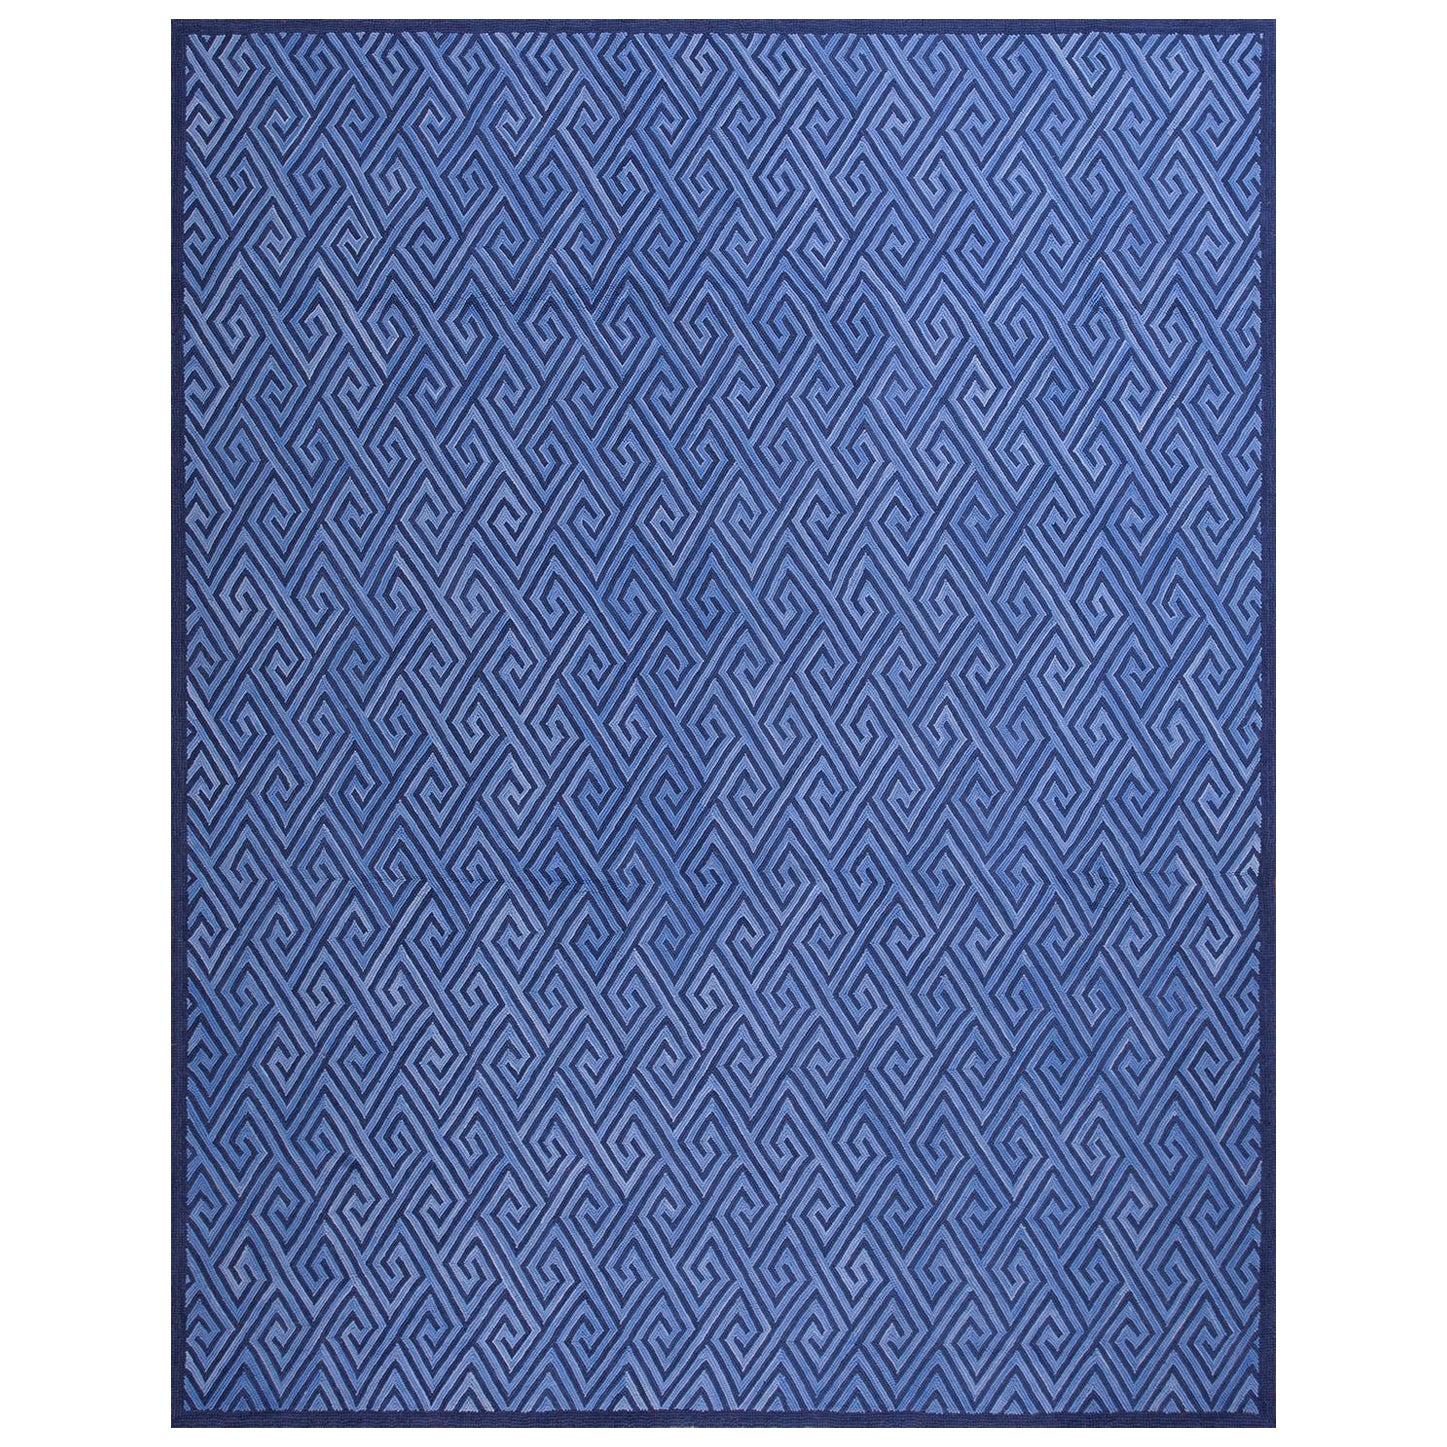 Contemporary American Hooked Rug (8' x 10' - 243 x 304 )